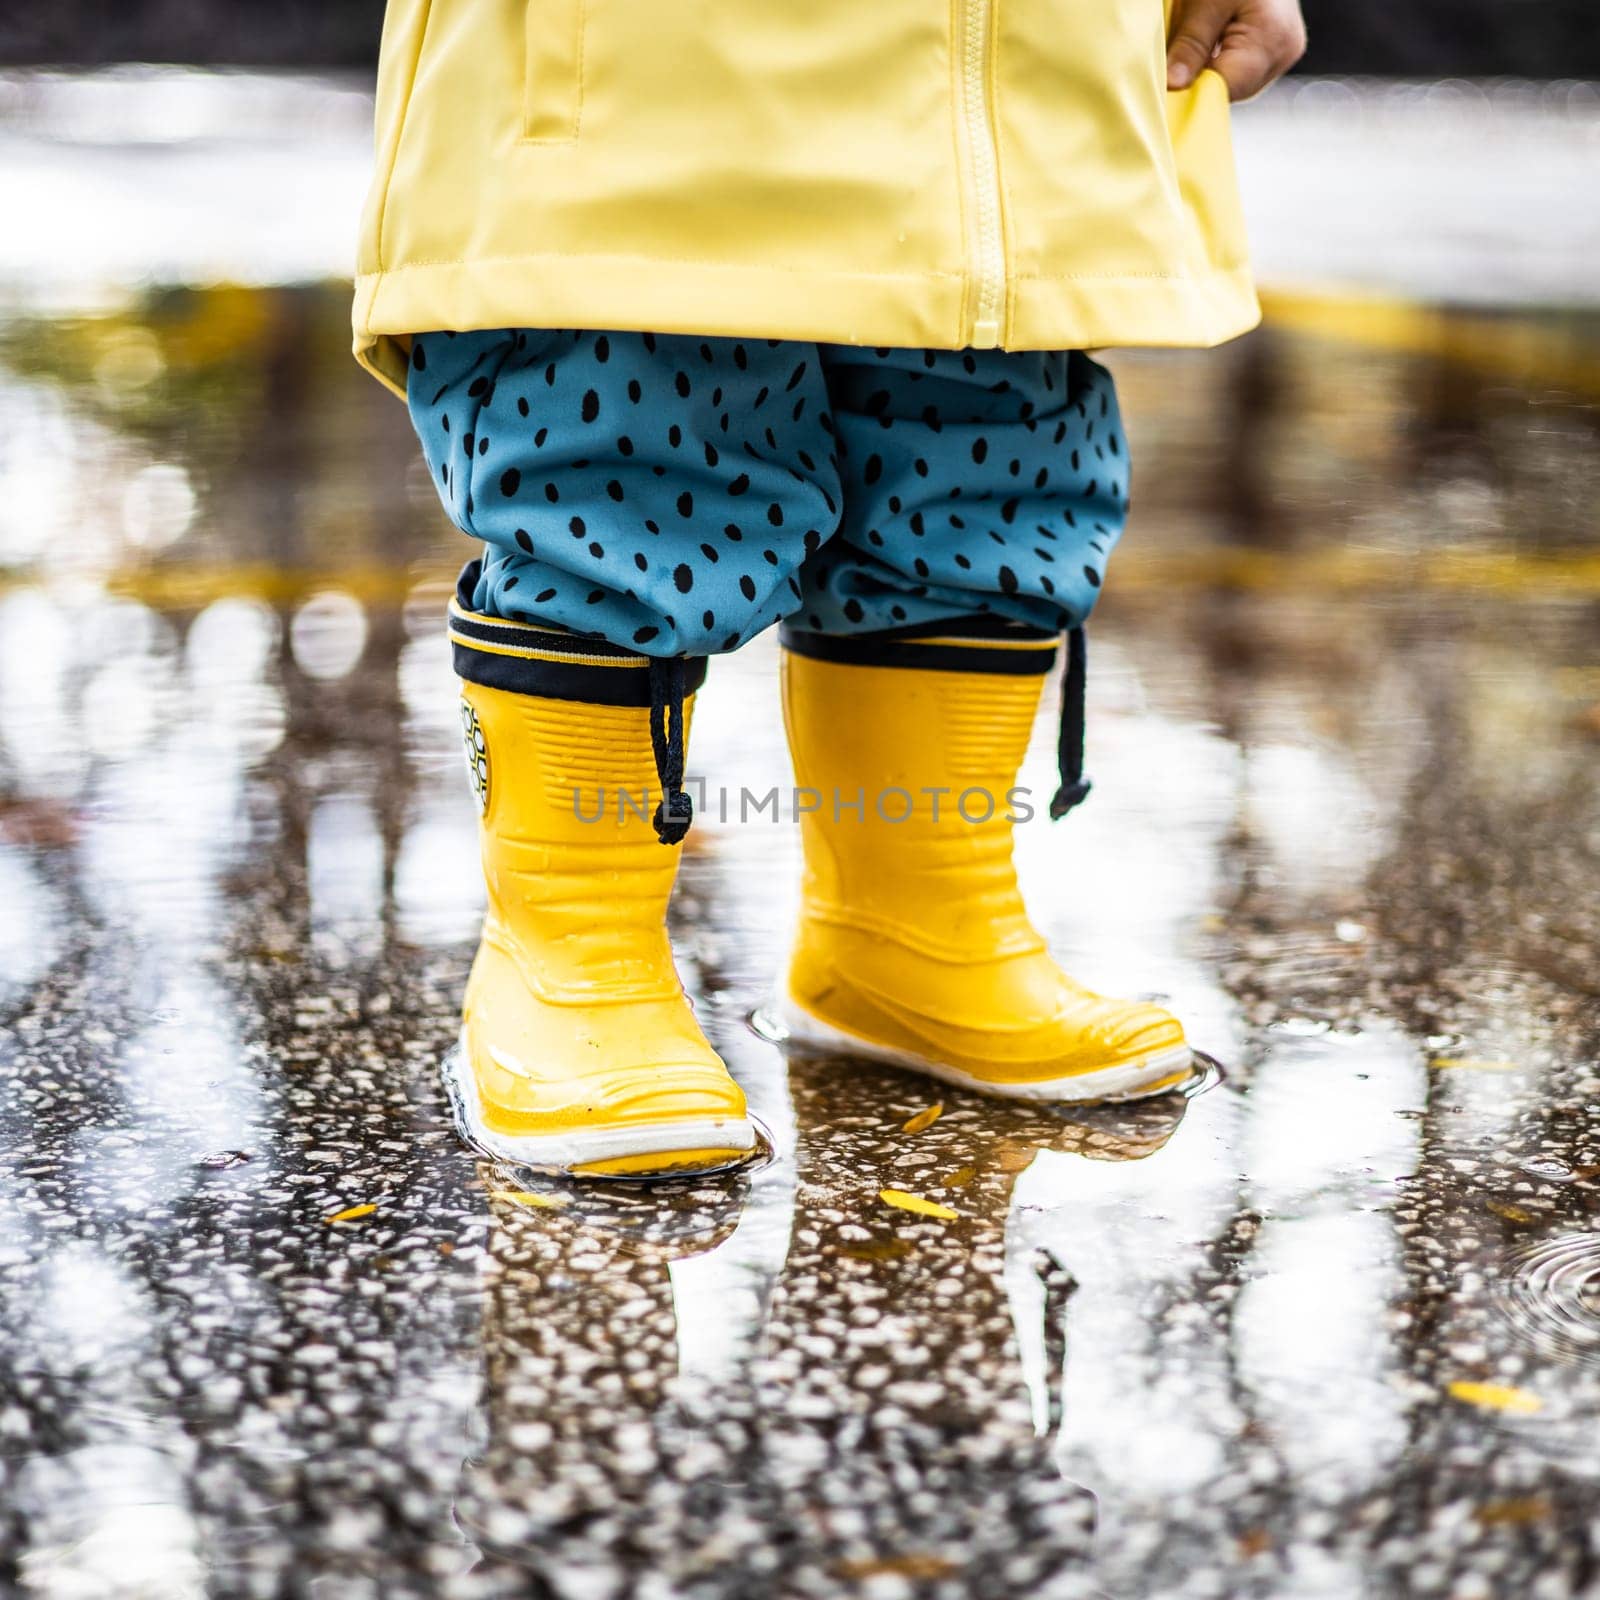 Small infant boy wearing yellow rubber boots and yellow waterproof raincoat standing in puddle on a overcast rainy day. Child in the rain